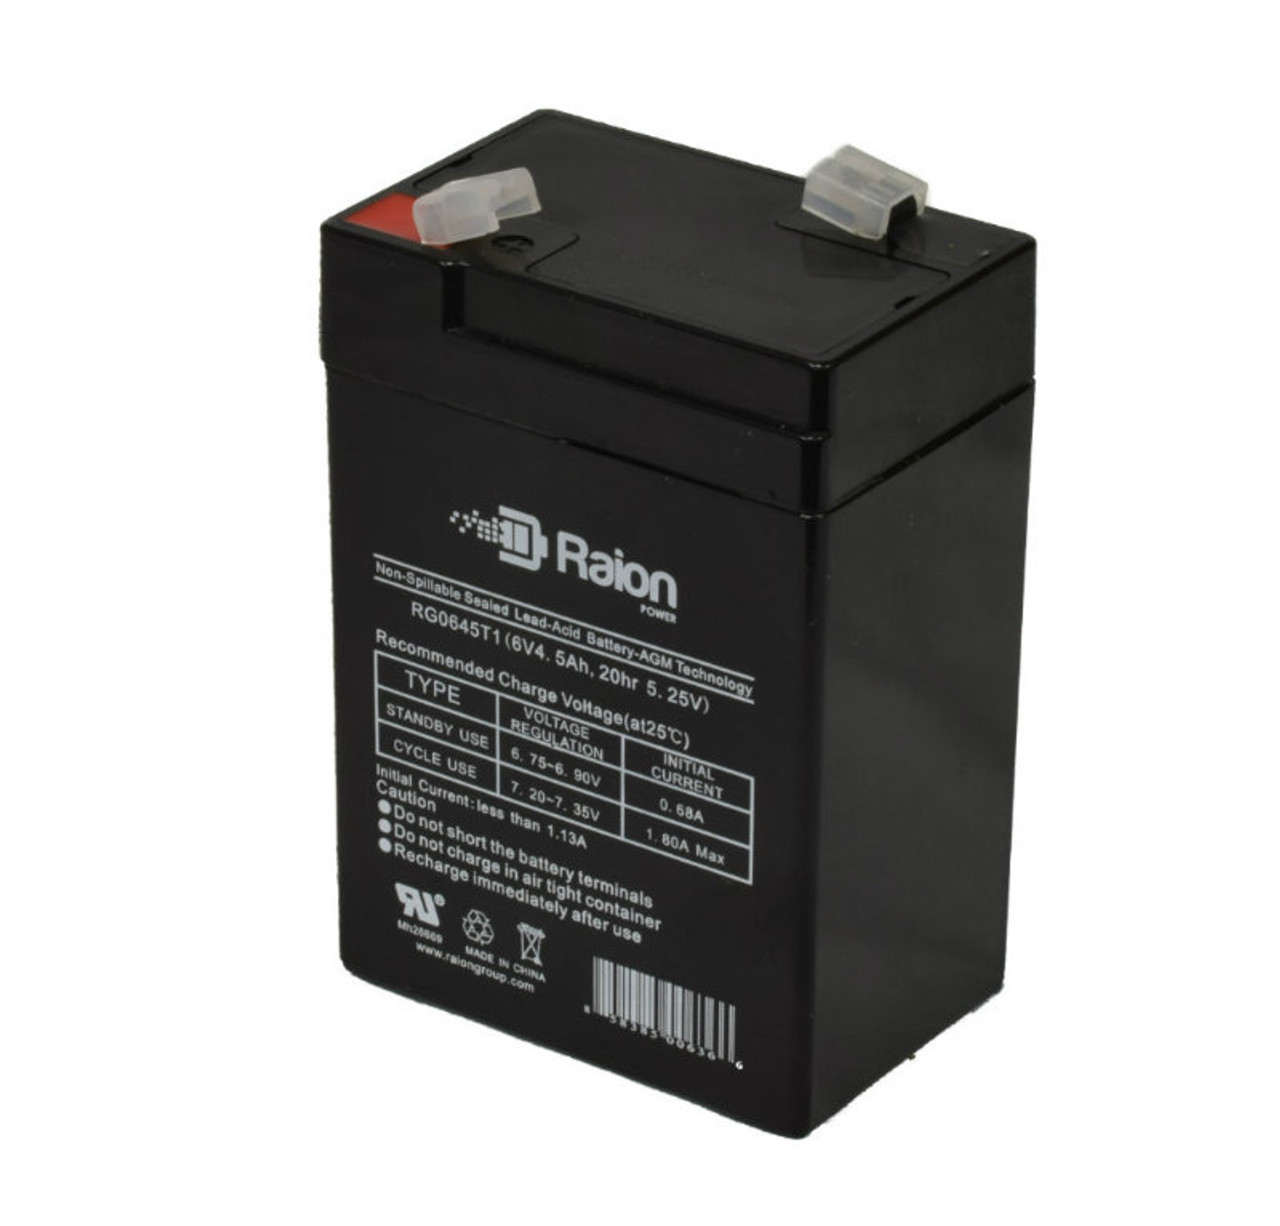 Raion Power RG0645T1 6V 4.5Ah Replacement Battery Cartridge for AJC C4.5S